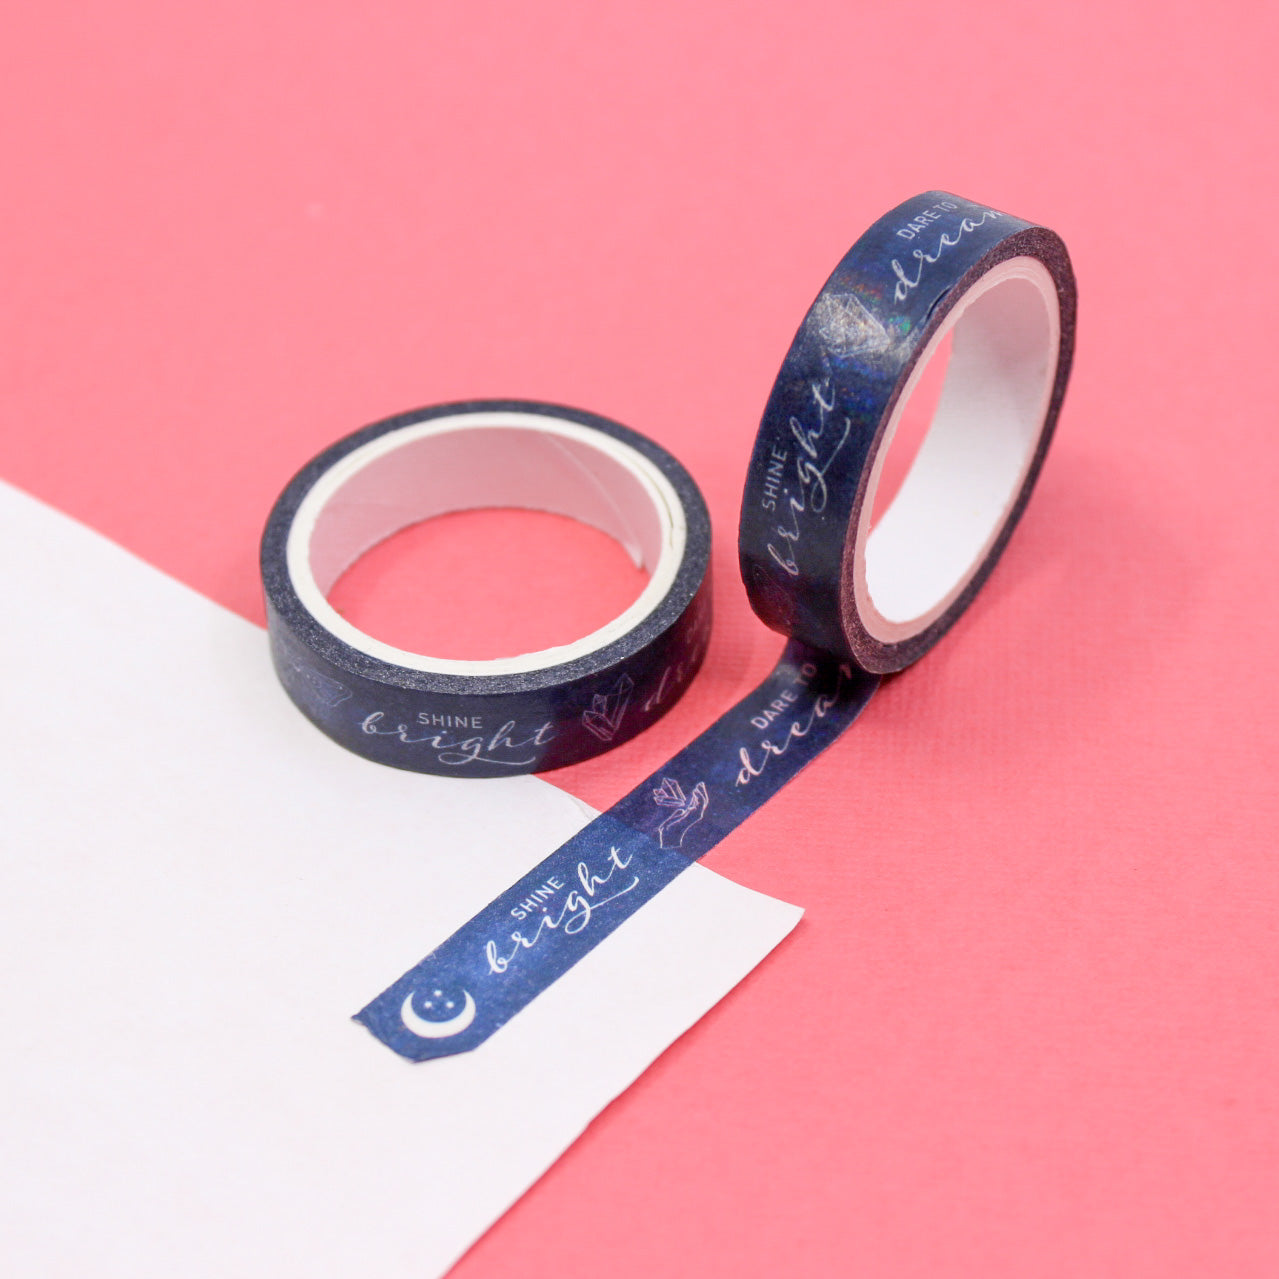 Add a touch of celestial beauty to your projects with this enchanting washi tape featuring a shining moon design. Perfect for decorating journals, planners, or scrapbooks with a celestial theme. This tape is sold at BBB Supplies Craft Shop.